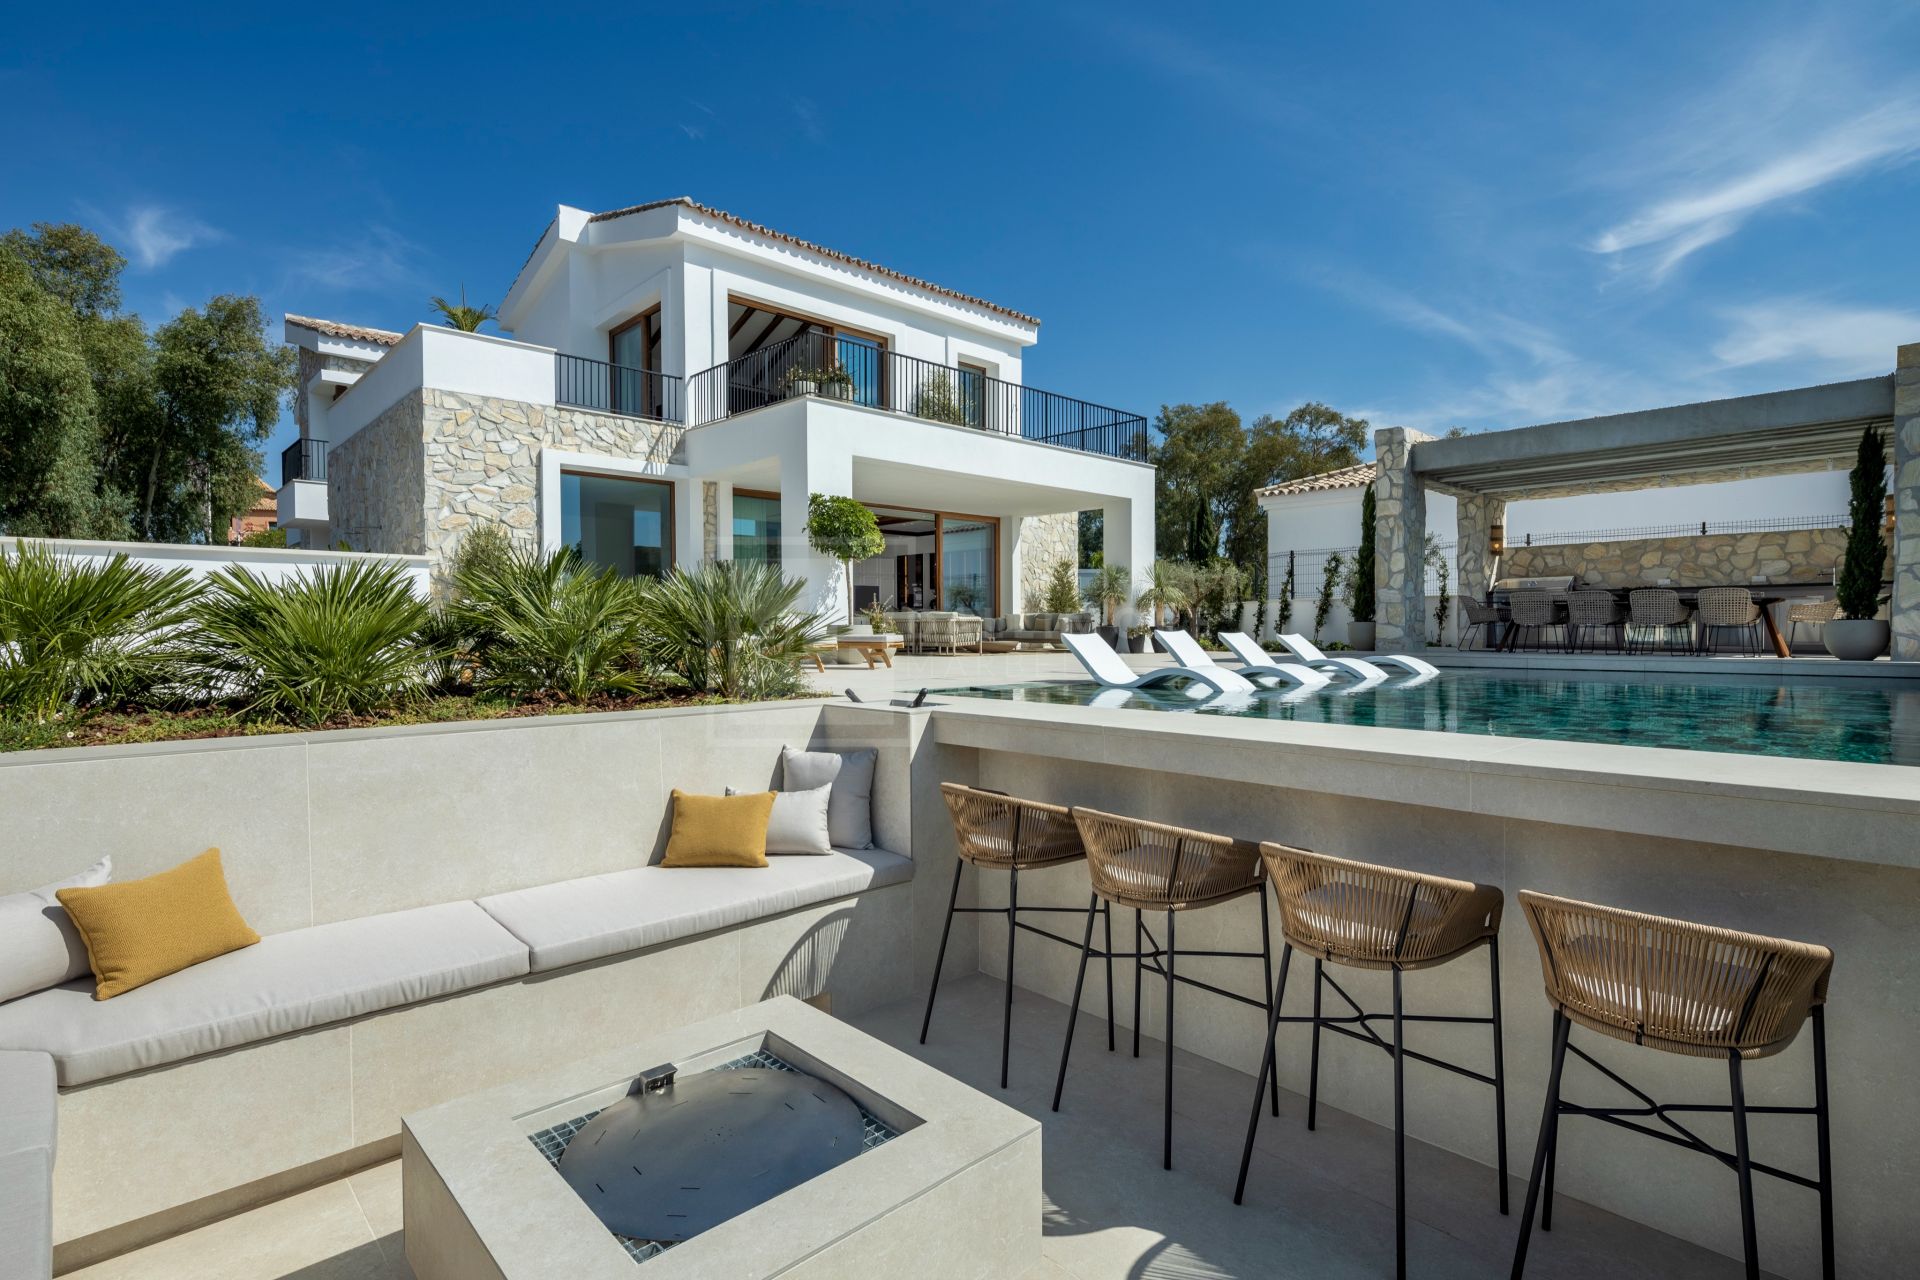 LUXURIOUS SPANISH VILLA WITH PANORAMIC SEA VIEWS IN DOUBLE-GATED COMMUNITY